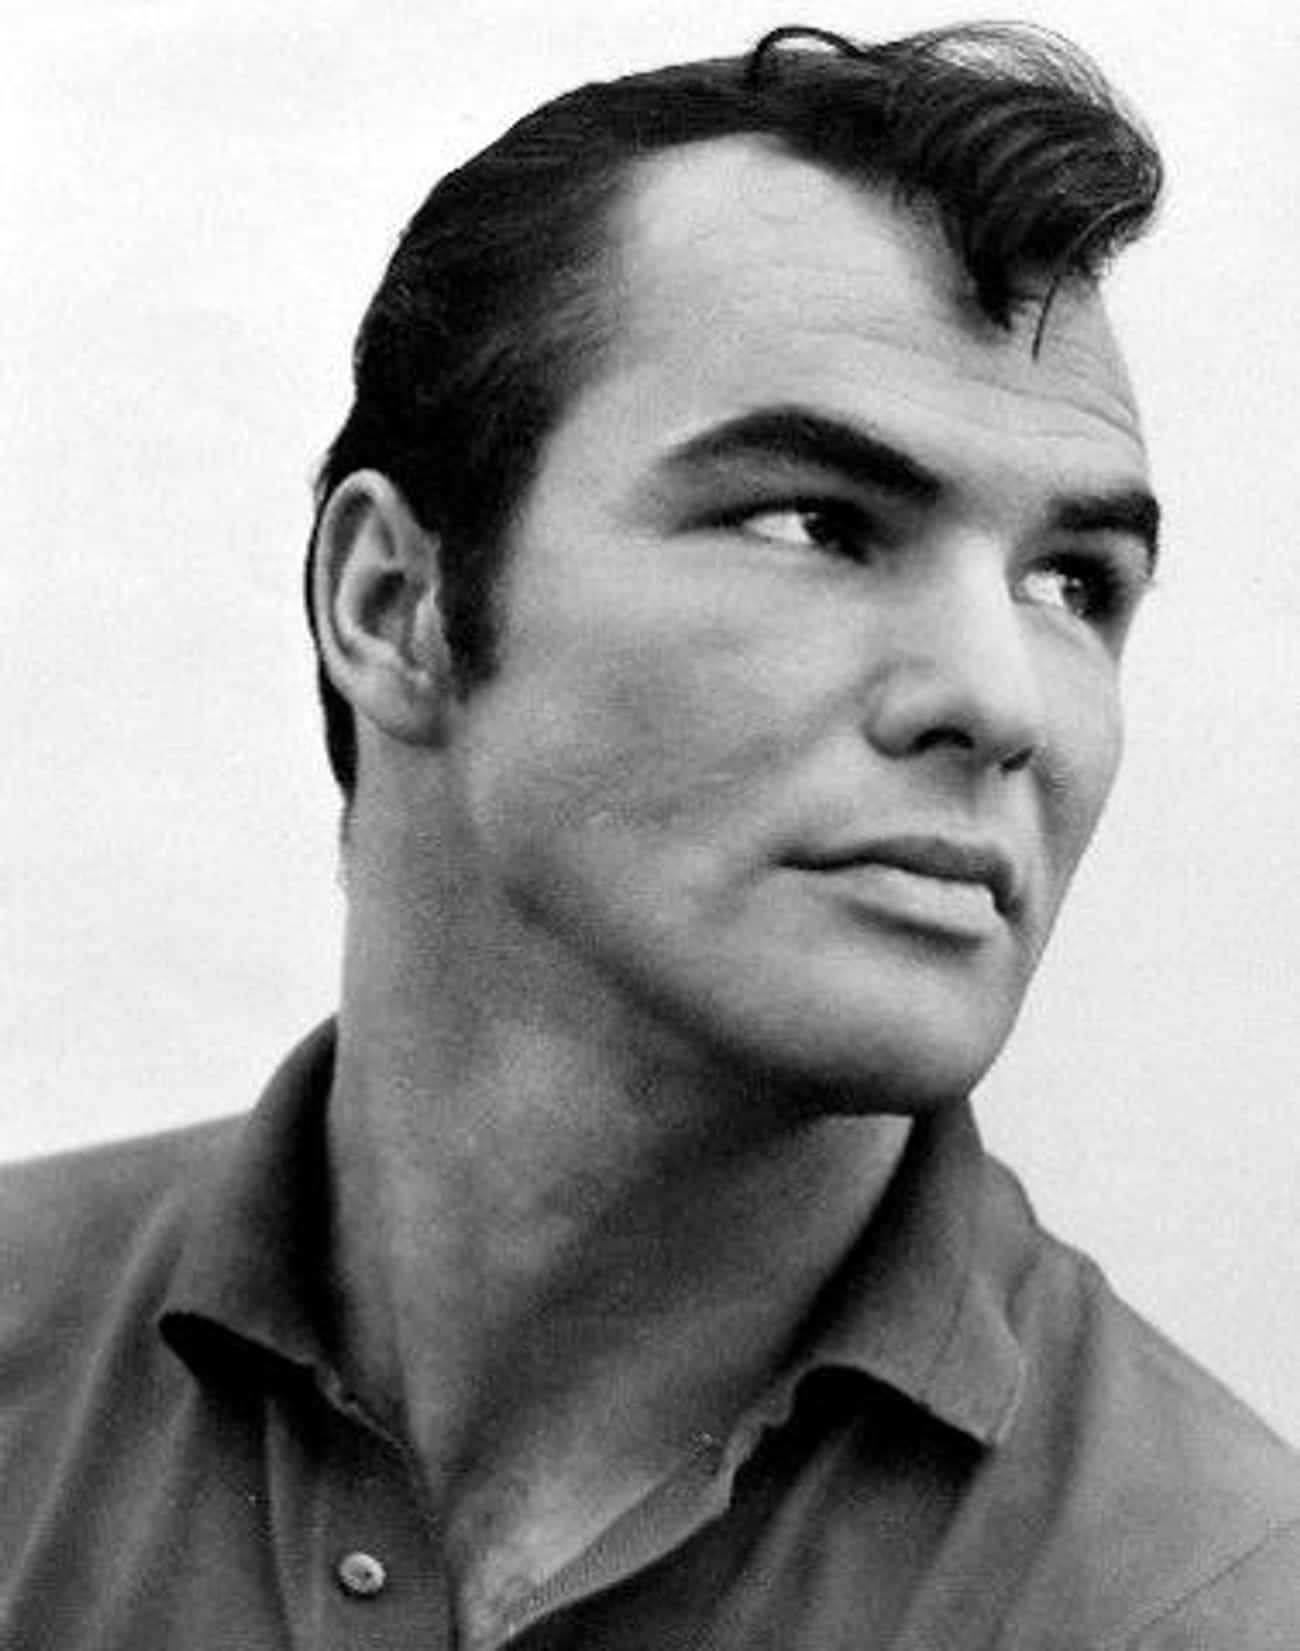 Young Burt Reynolds in a Polo Shirt